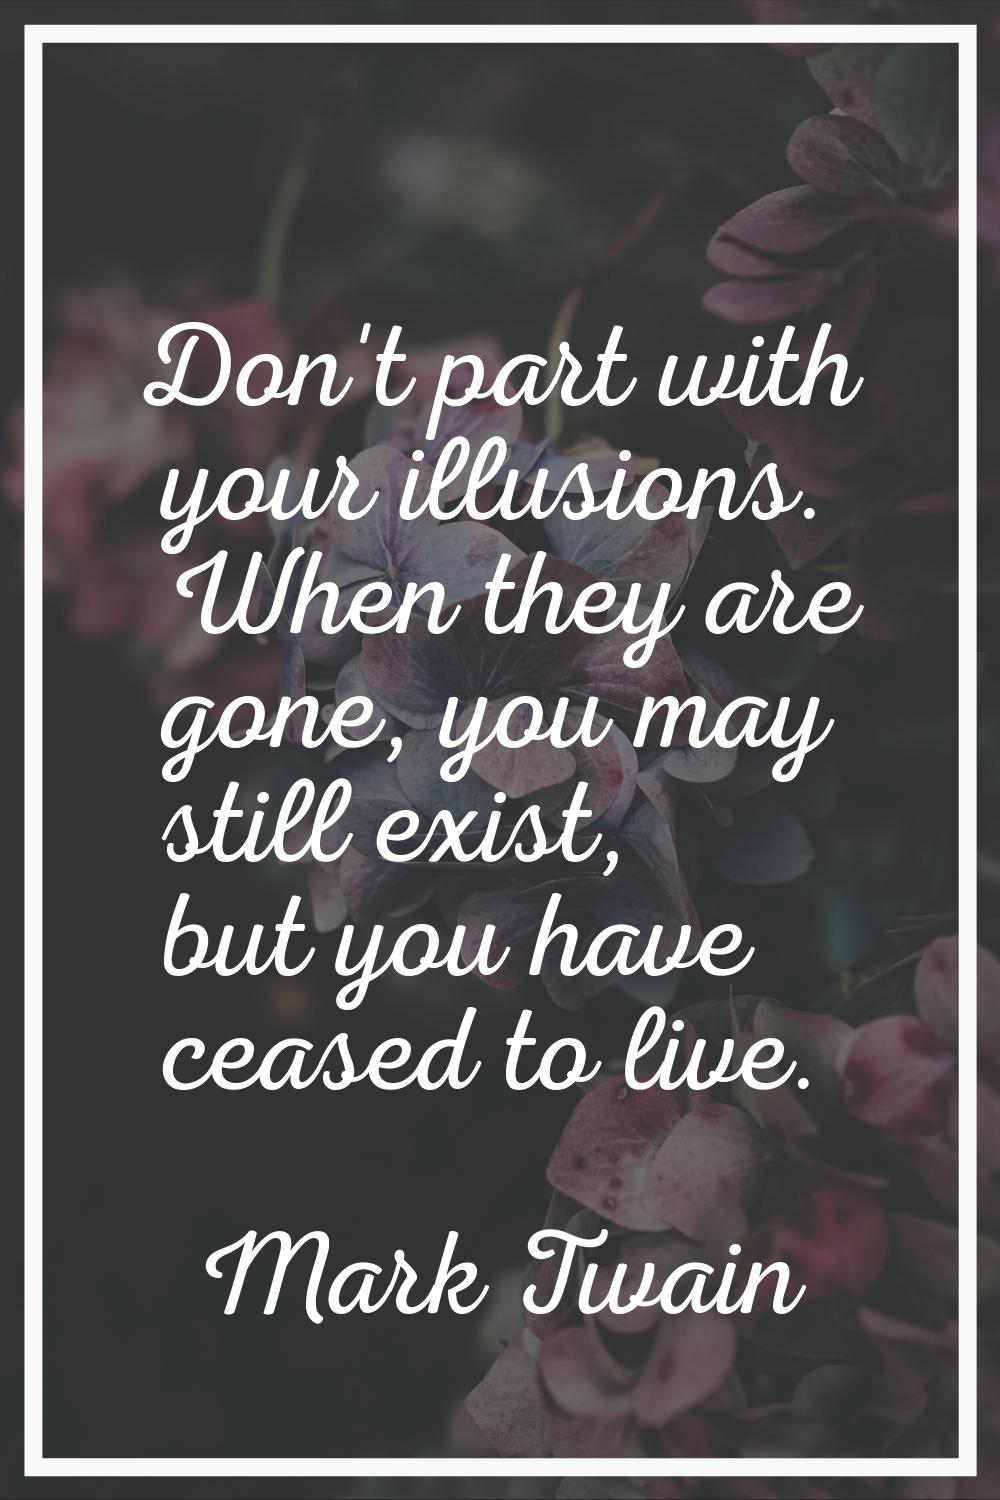 Don't part with your illusions. When they are gone, you may still exist, but you have ceased to liv